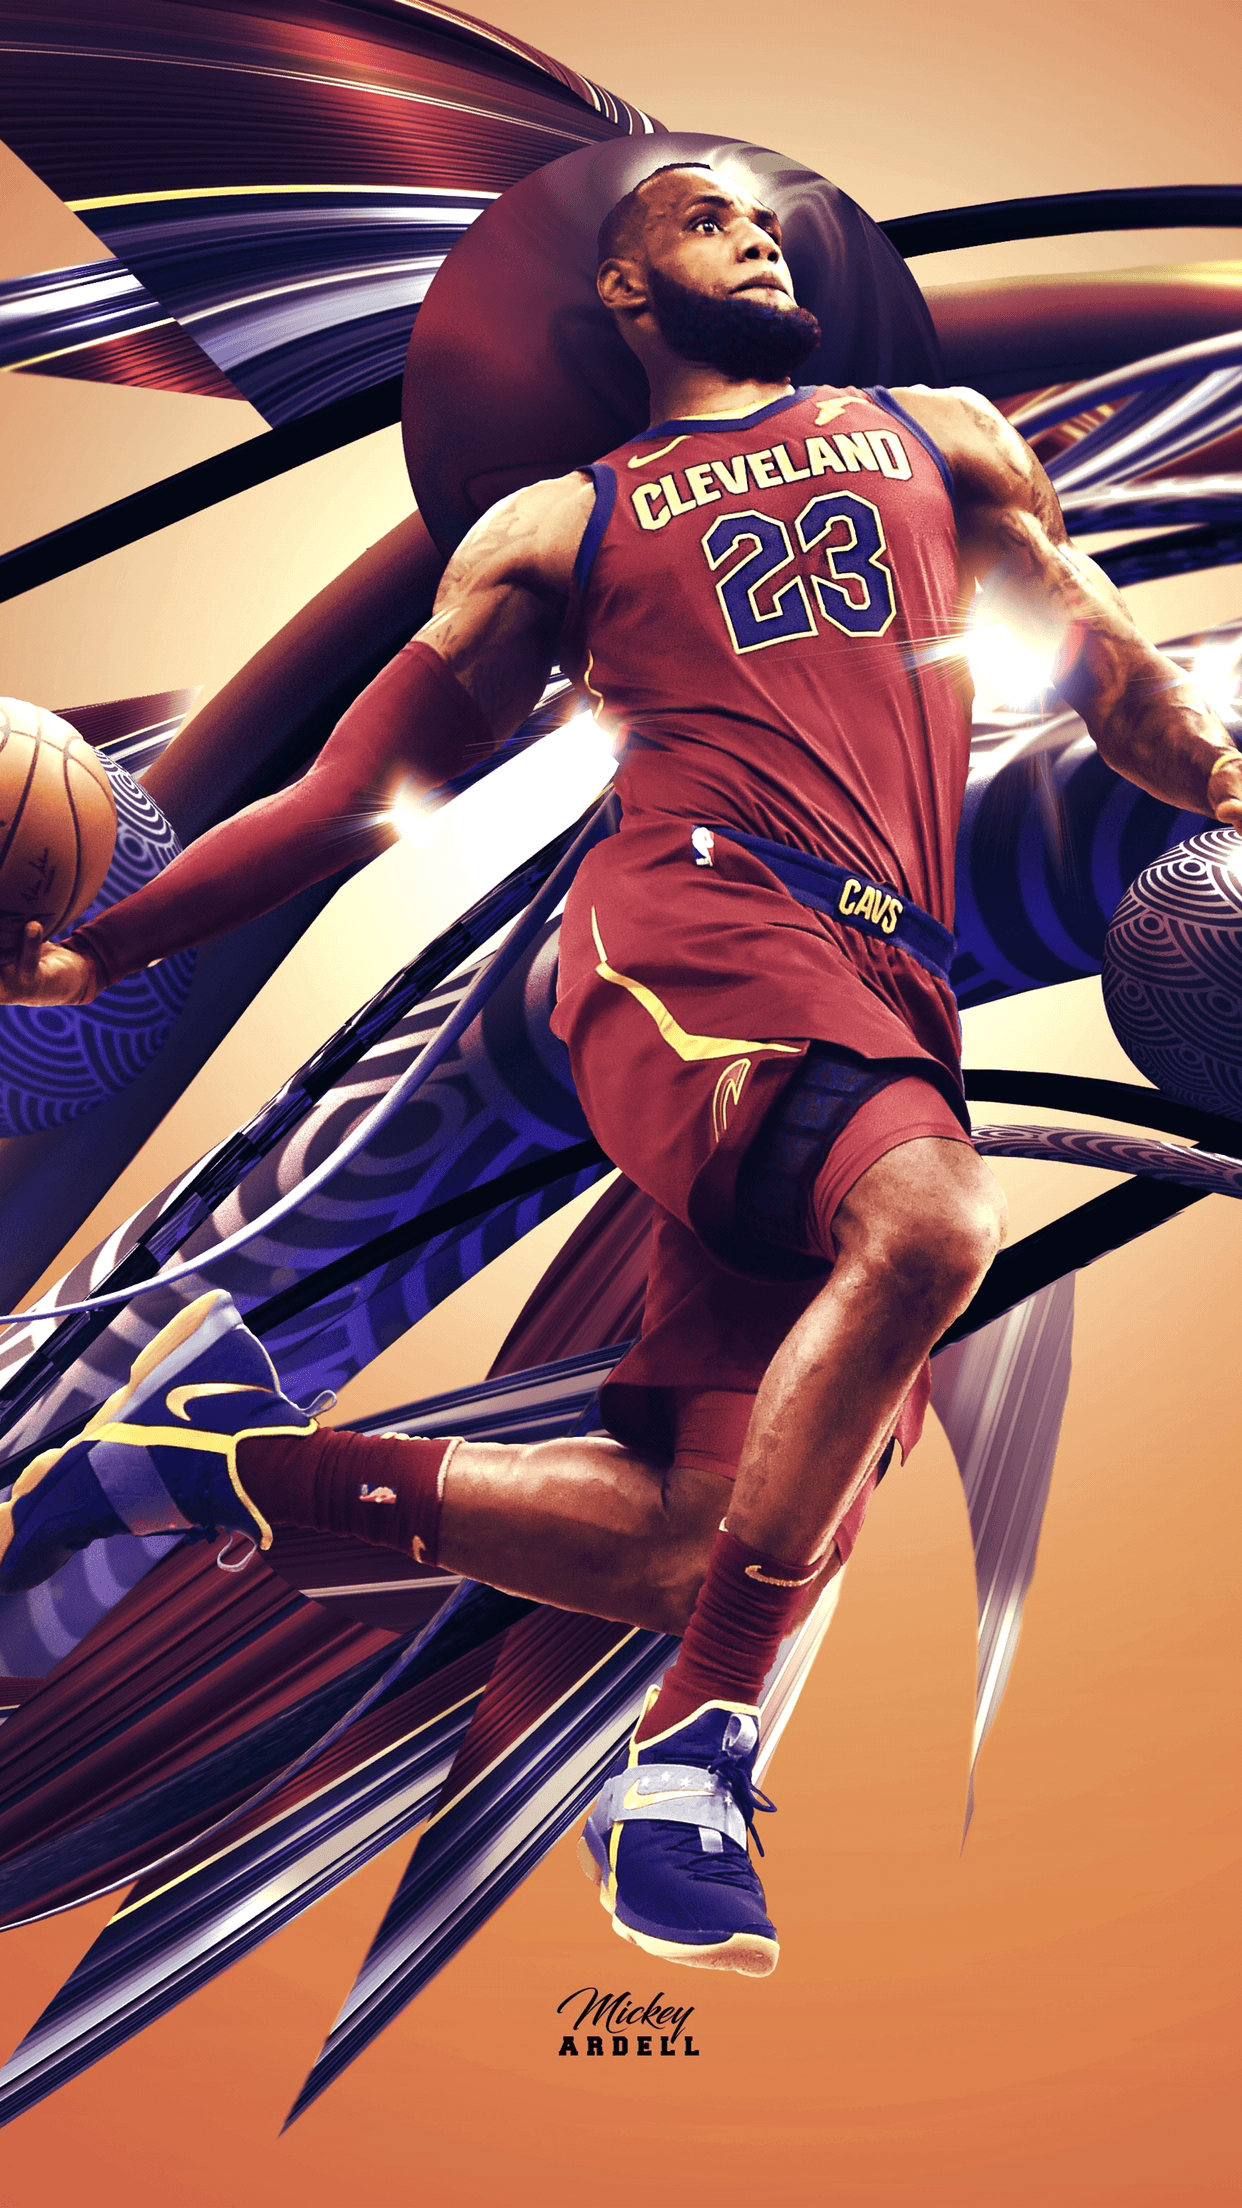 56 NBA Wallpapers HD 4K 5K for PC and Mobile  Download free images for  iPhone Android